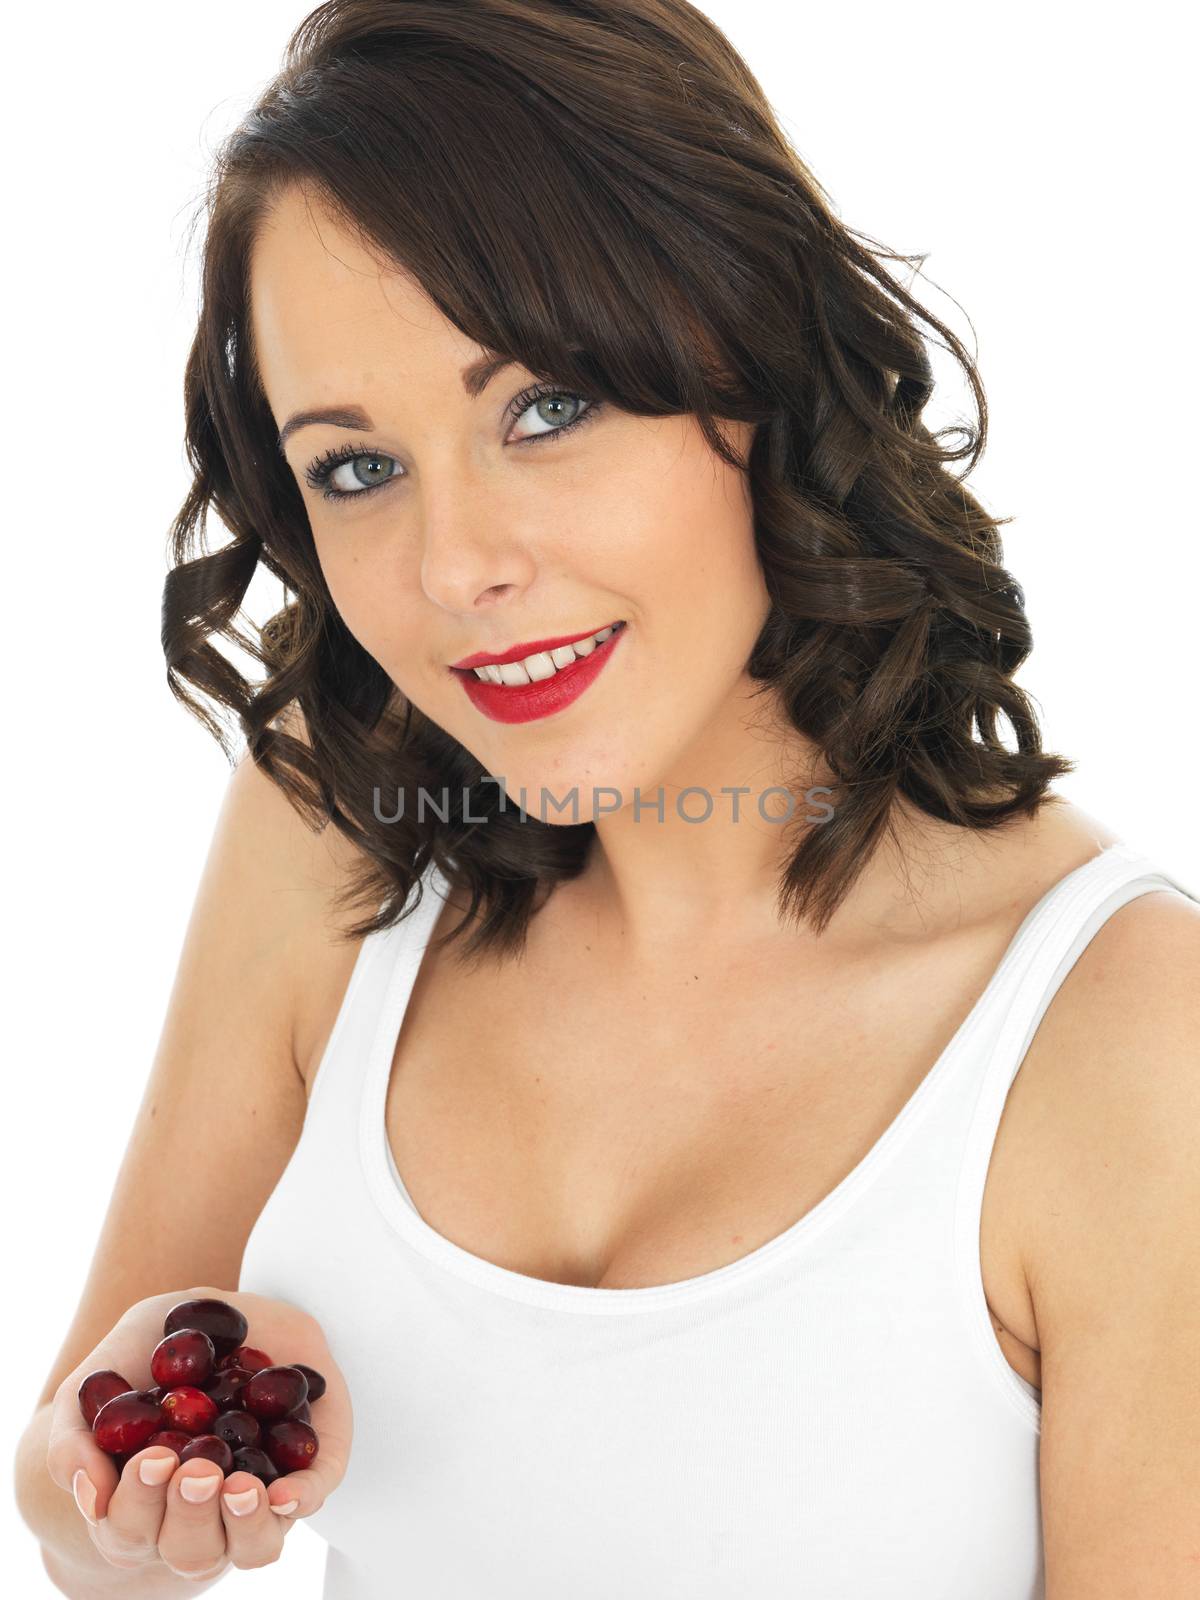 Young Woman Holding a Handful of Cranberries by Whiteboxmedia